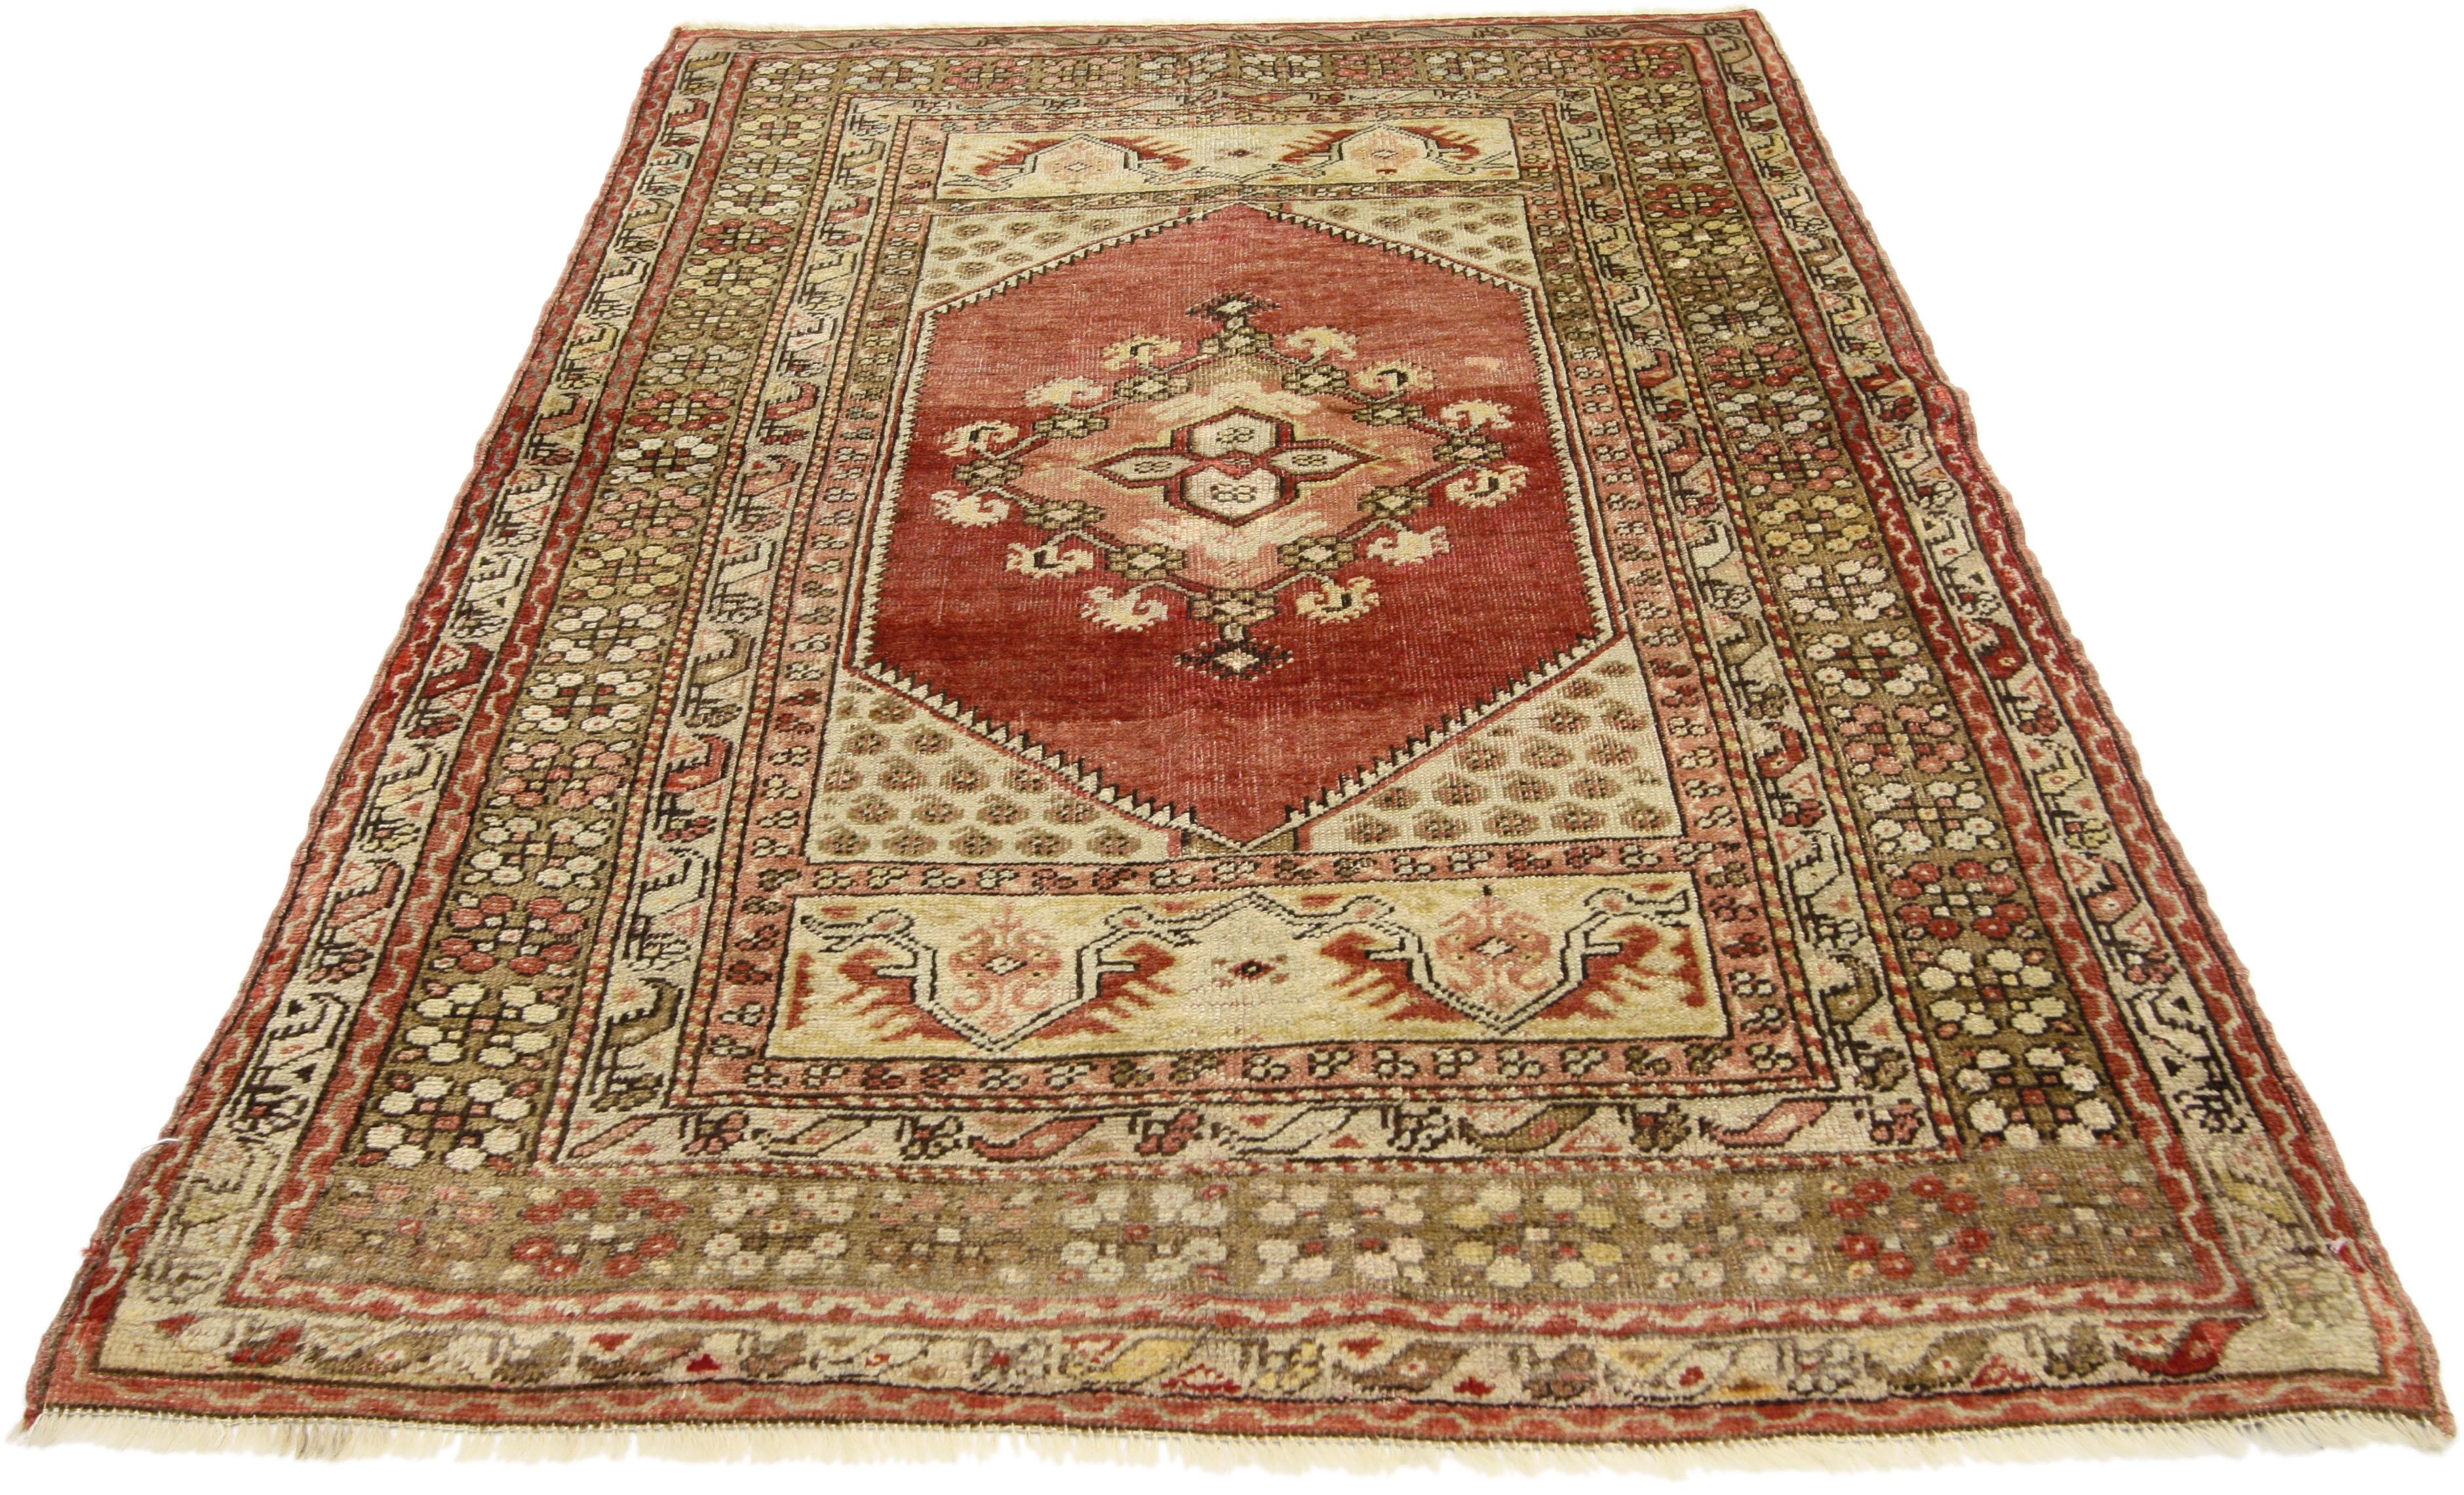 73645, vintage Turkish Oushak Accent rug, entry or foyer rug. This vintage Turkish Oushak rug features a modern traditional style. Immersed in Anatolian history and refined colors, this vintage Oushak rug combines simplicity with sophistication.